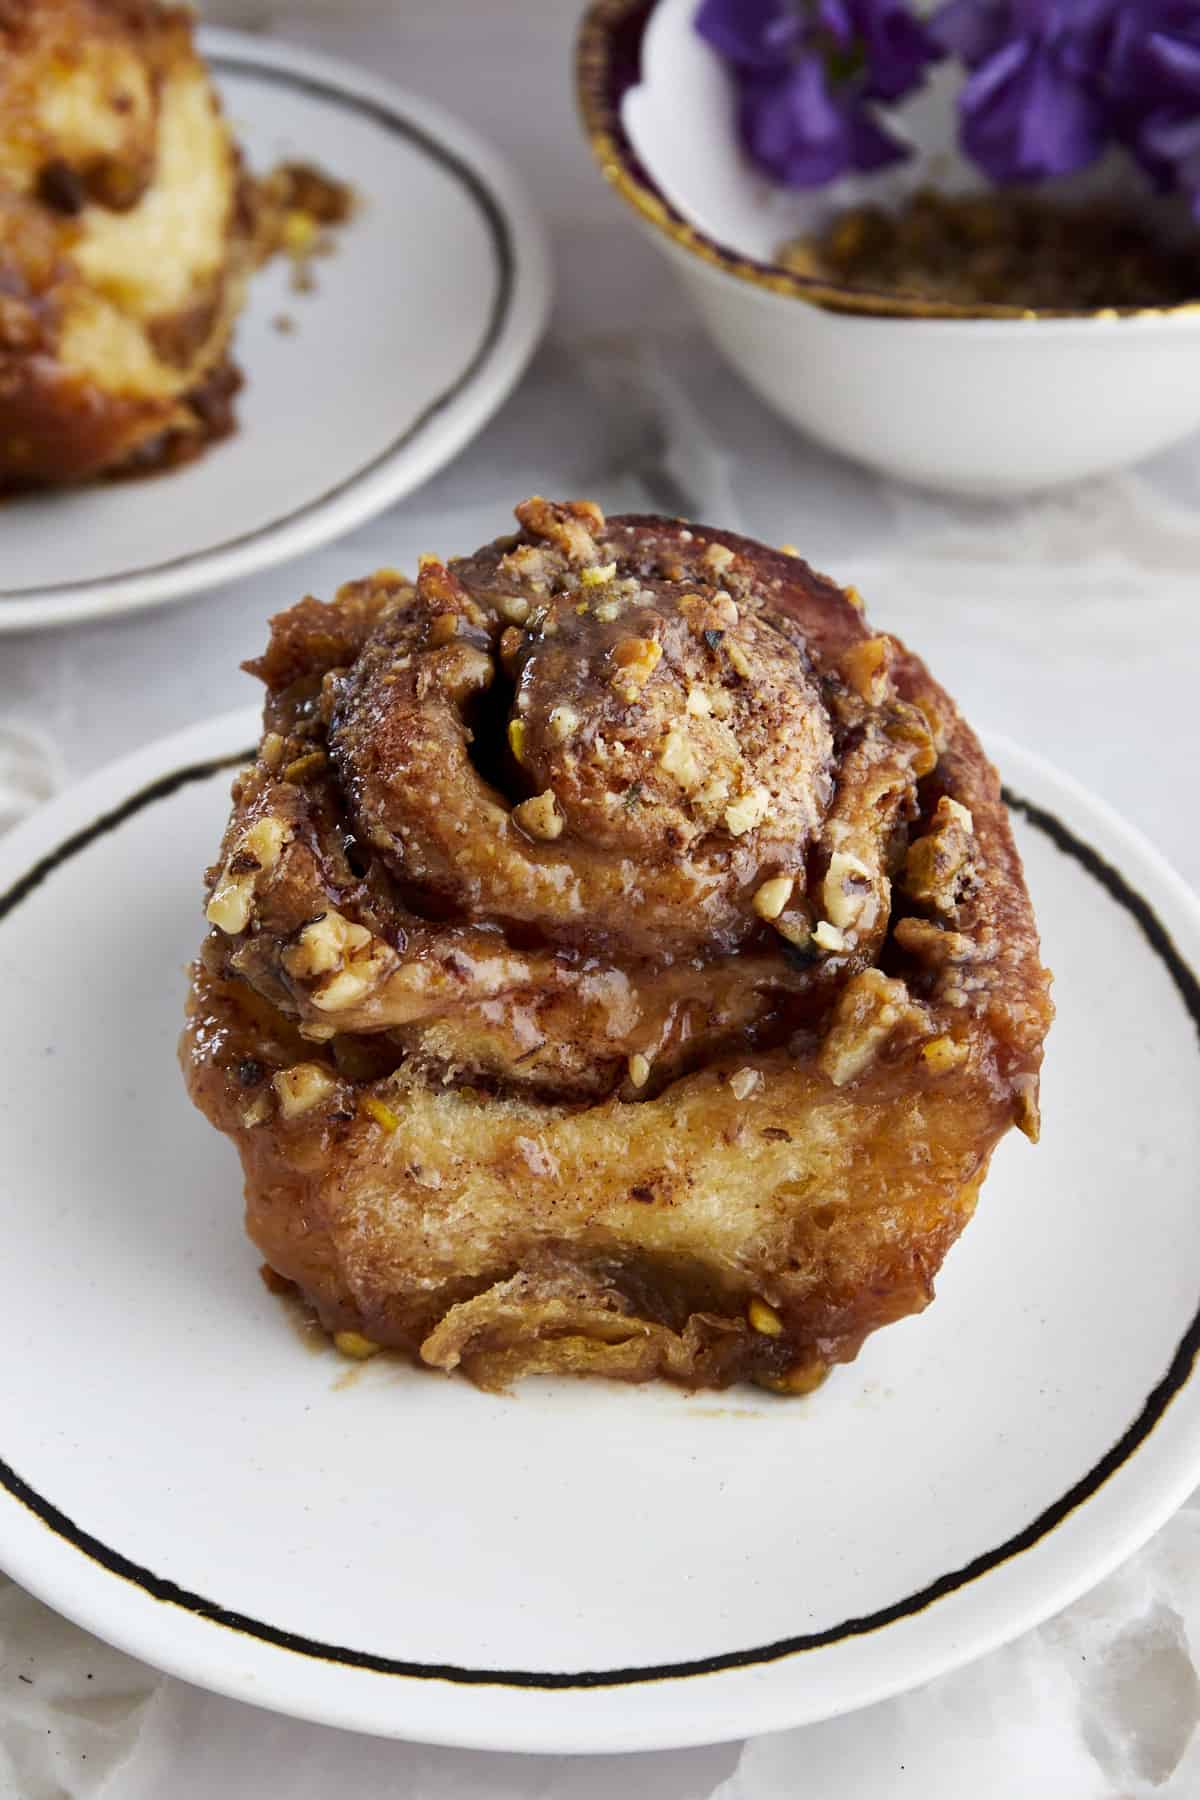 a pistachio walnut cinnamon roll with syrup on a plate